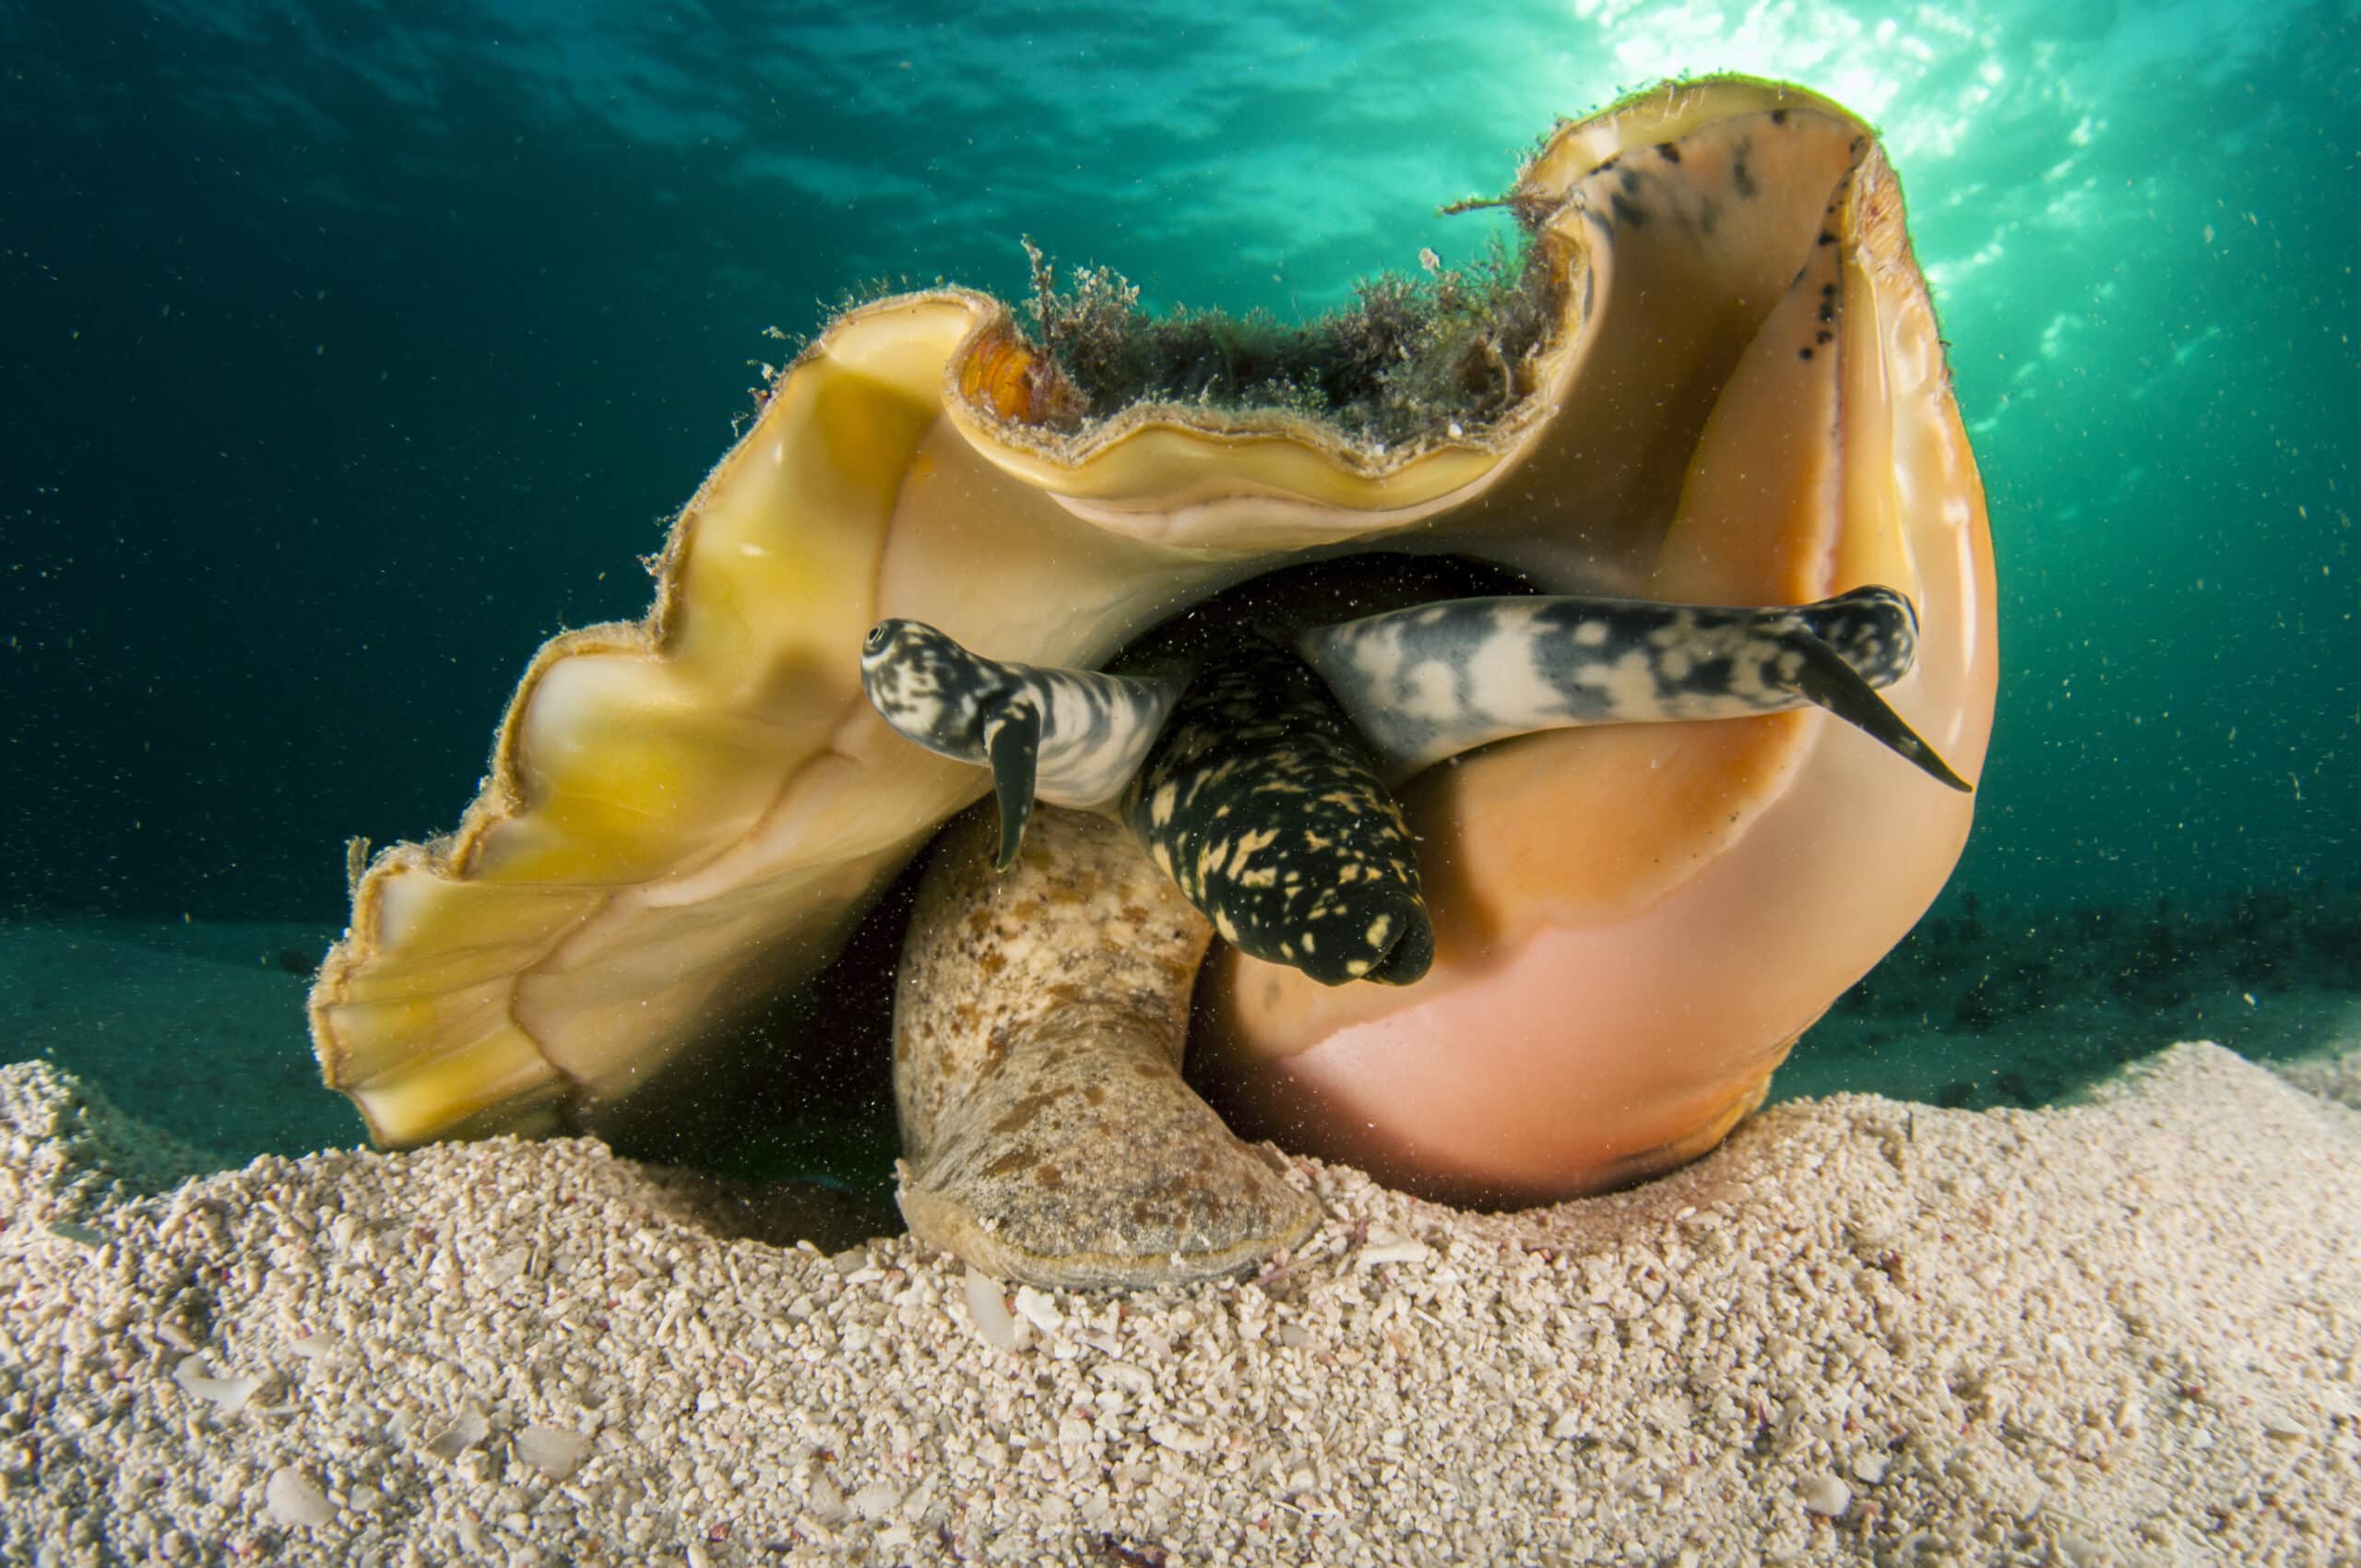 A large Conch in the ocean